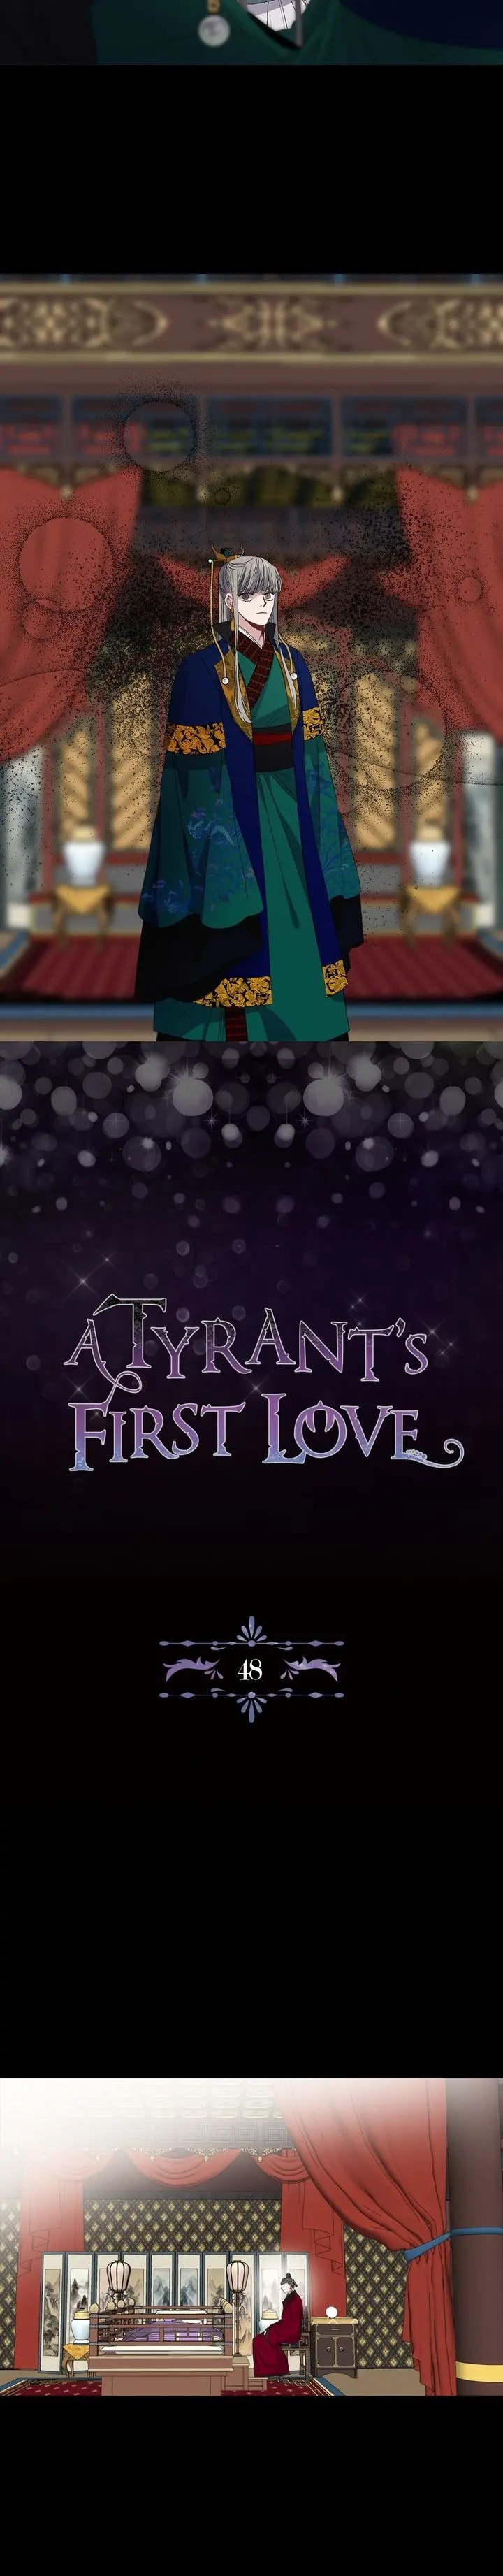 The Tyrant's First Love - Page 2